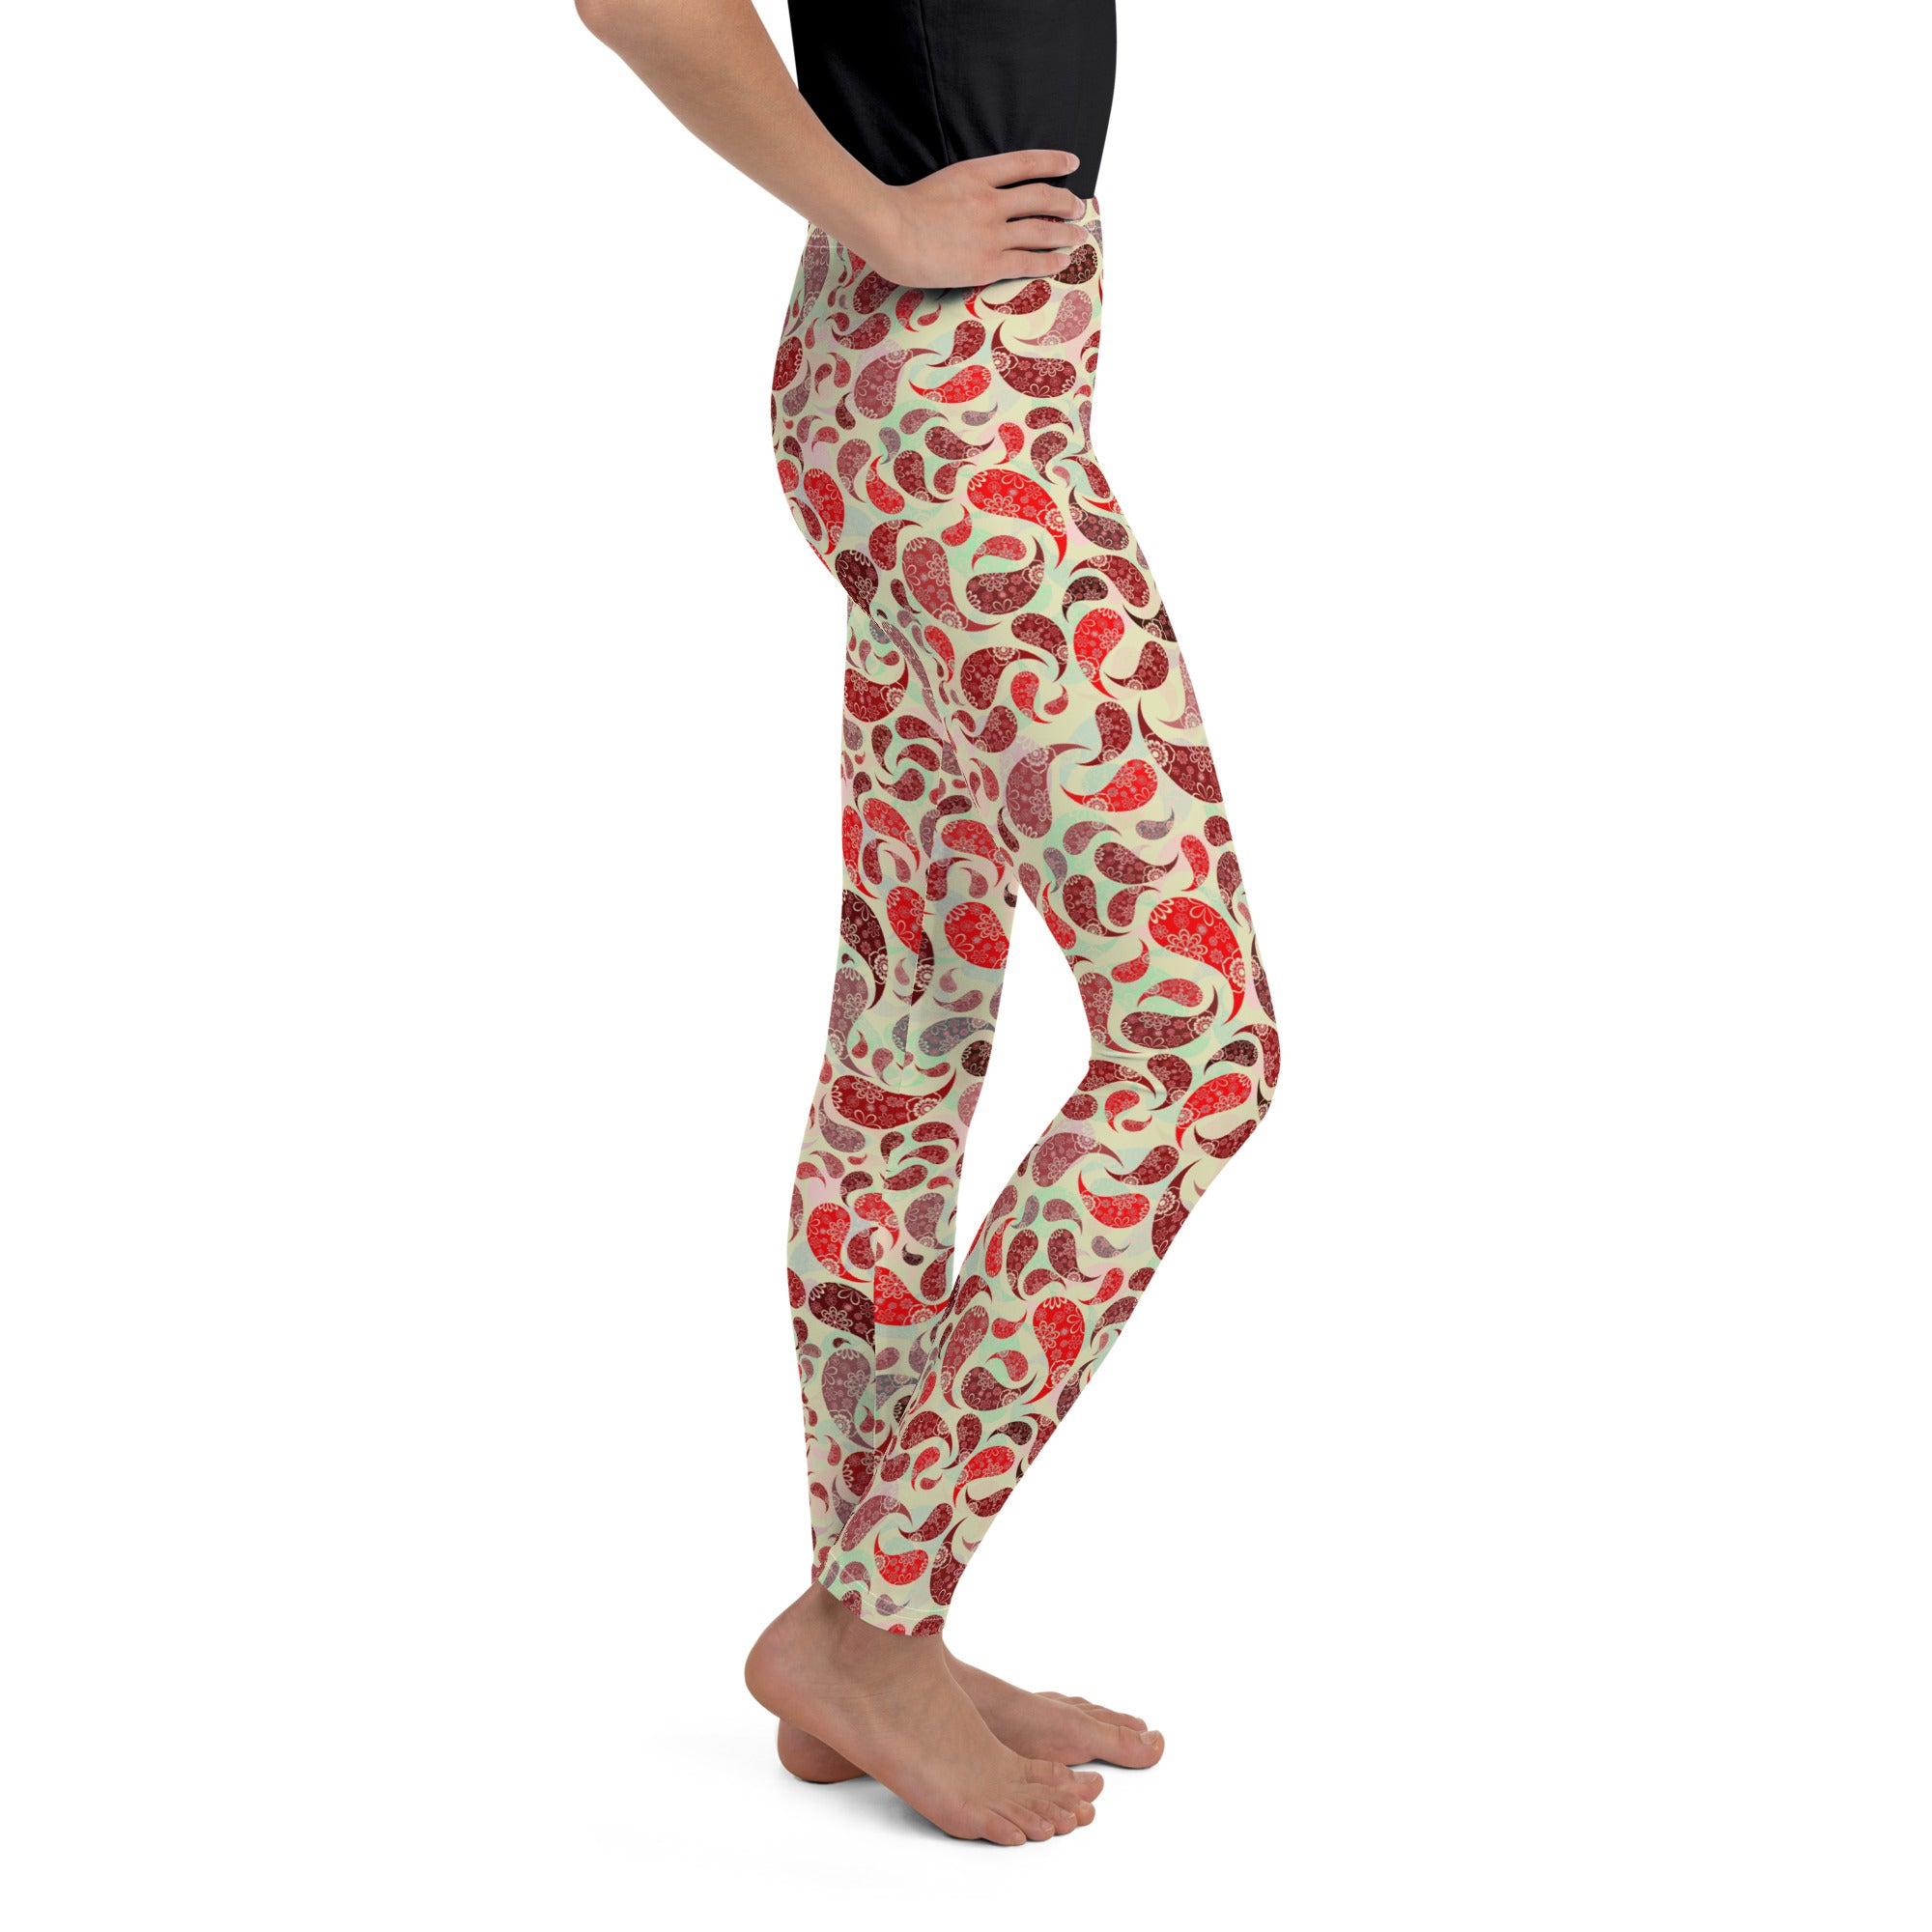 Youth Leggings- Paisley Red